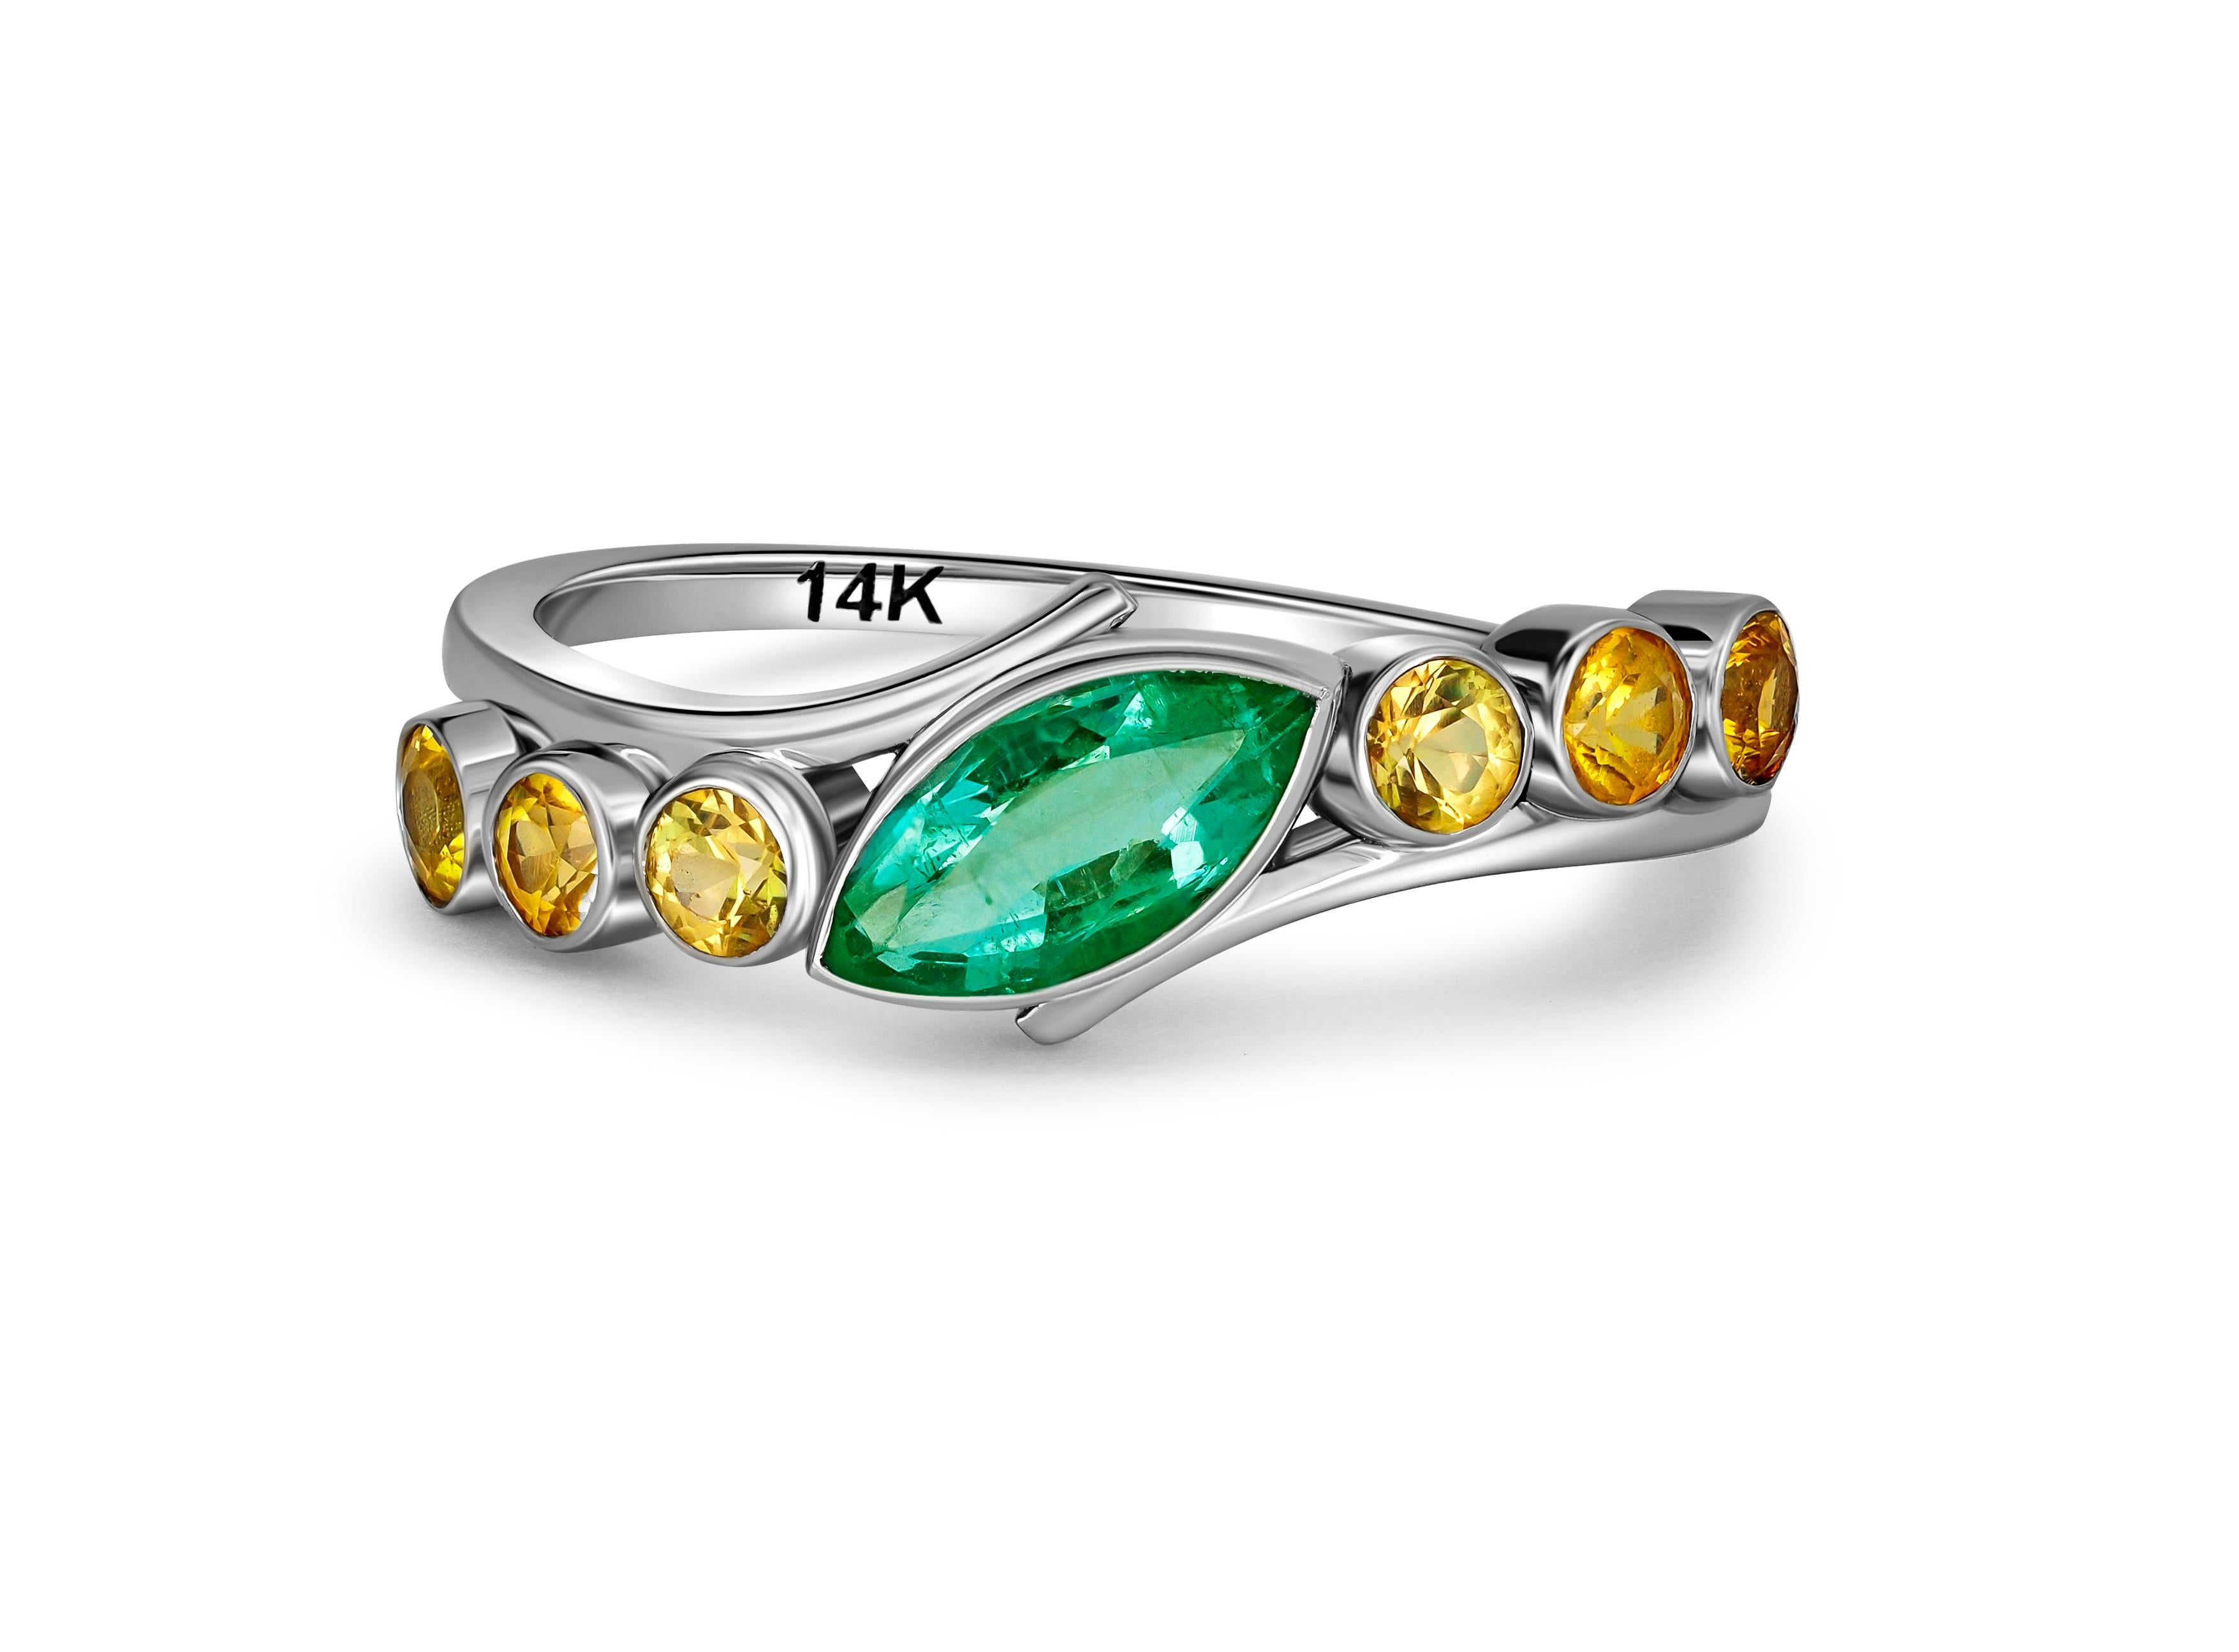 Marquise emerald ring in 14k gold. 
Emerald and yellow sapphire ring. Minimalist emerald ring. Emerald engagement ring. May Birthstone ring.

Metal: 14k gold
total weight 1.50 g. depends from size.

Gemstones:
Emerald: marquise shape, green color,